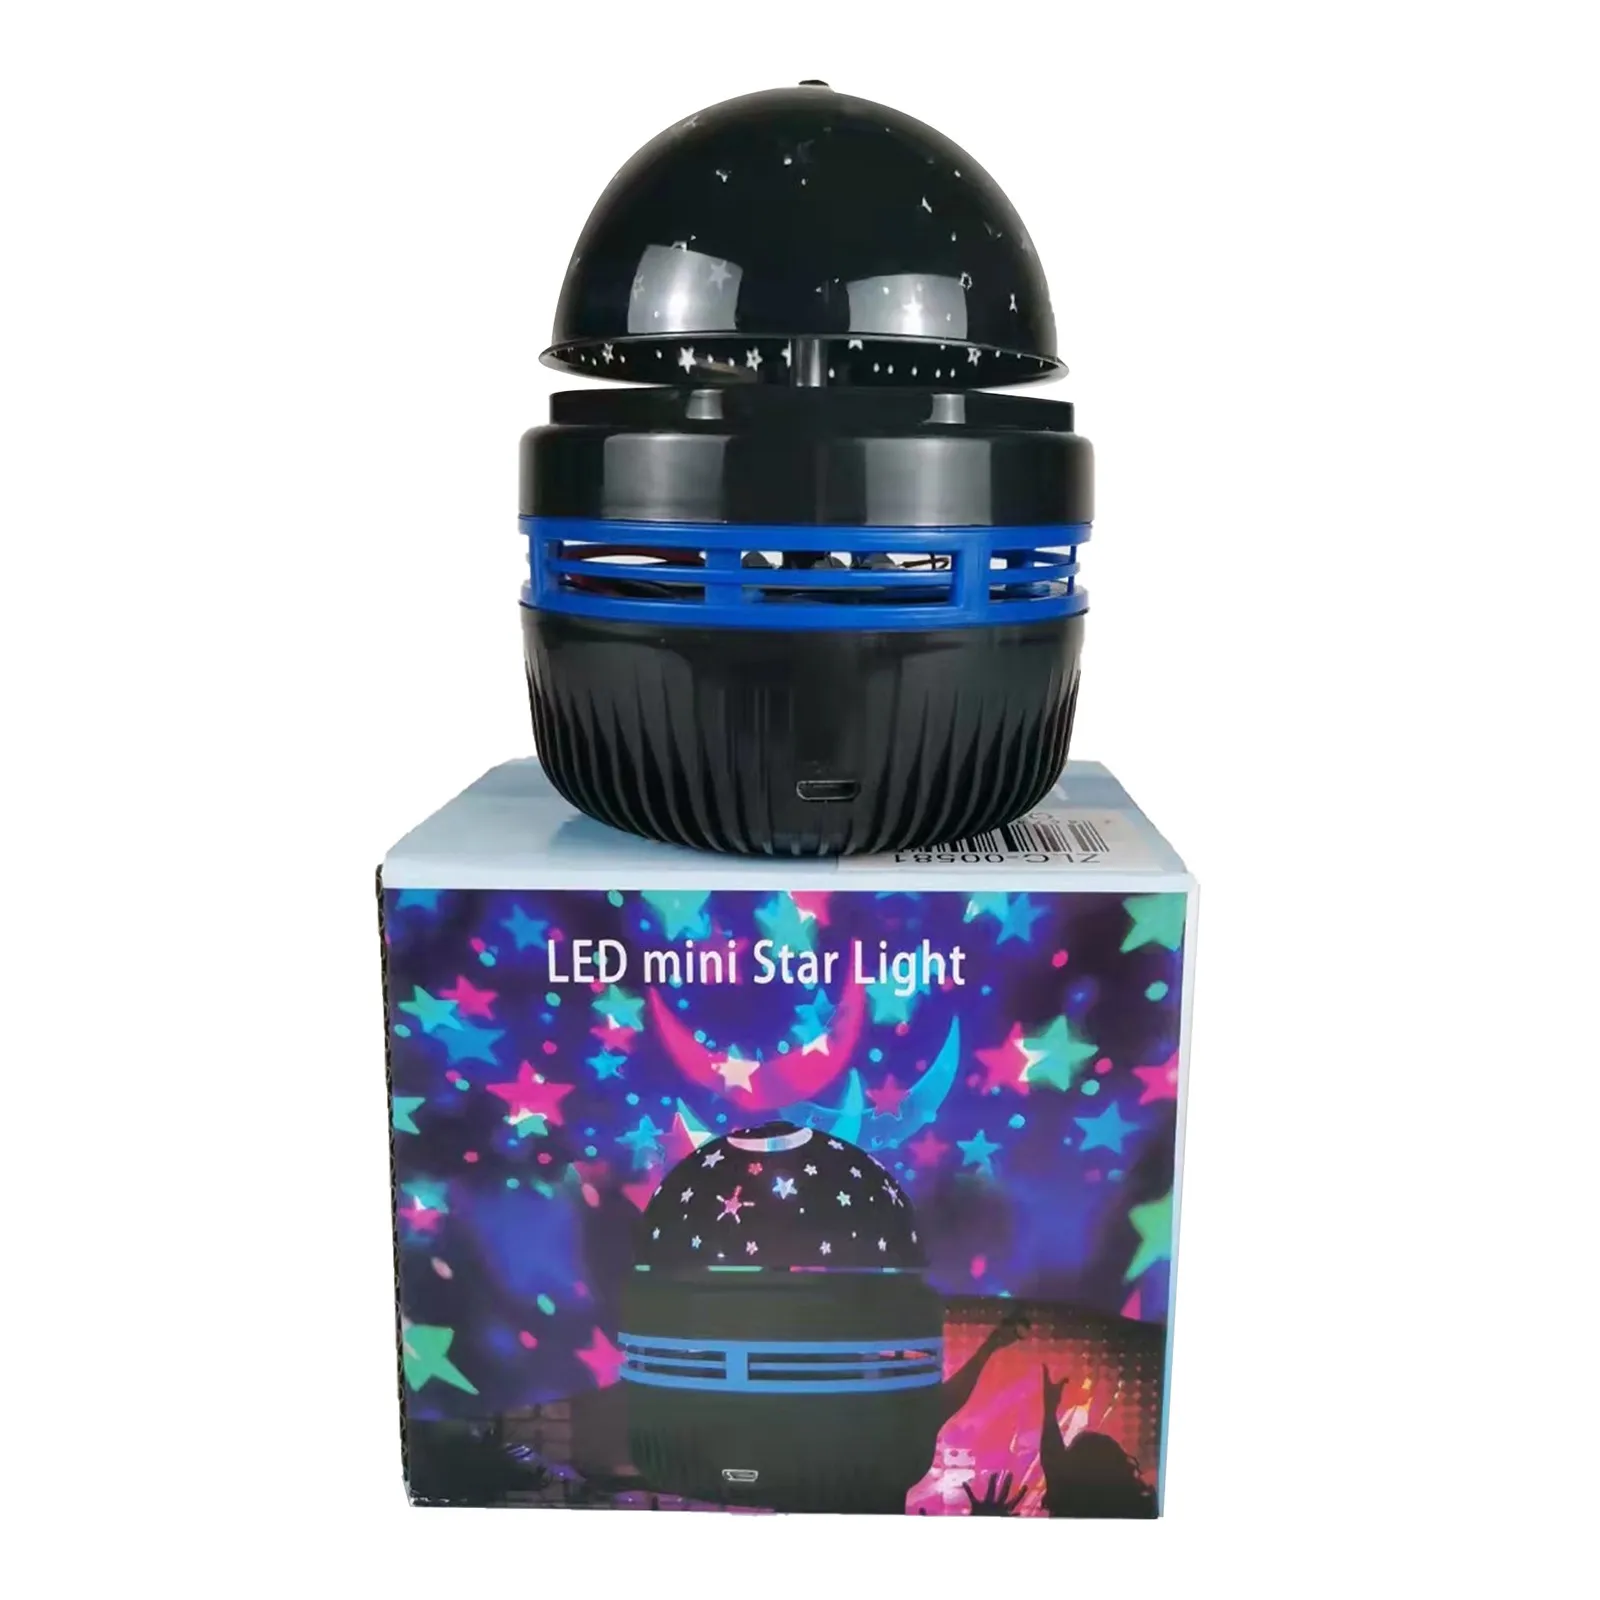 Usb Projection Lamp Magic Ball Light Sky Full Of Sky Projection Lighting Flashing Stage Atmosphere Night Lights For Bedroom wall night light